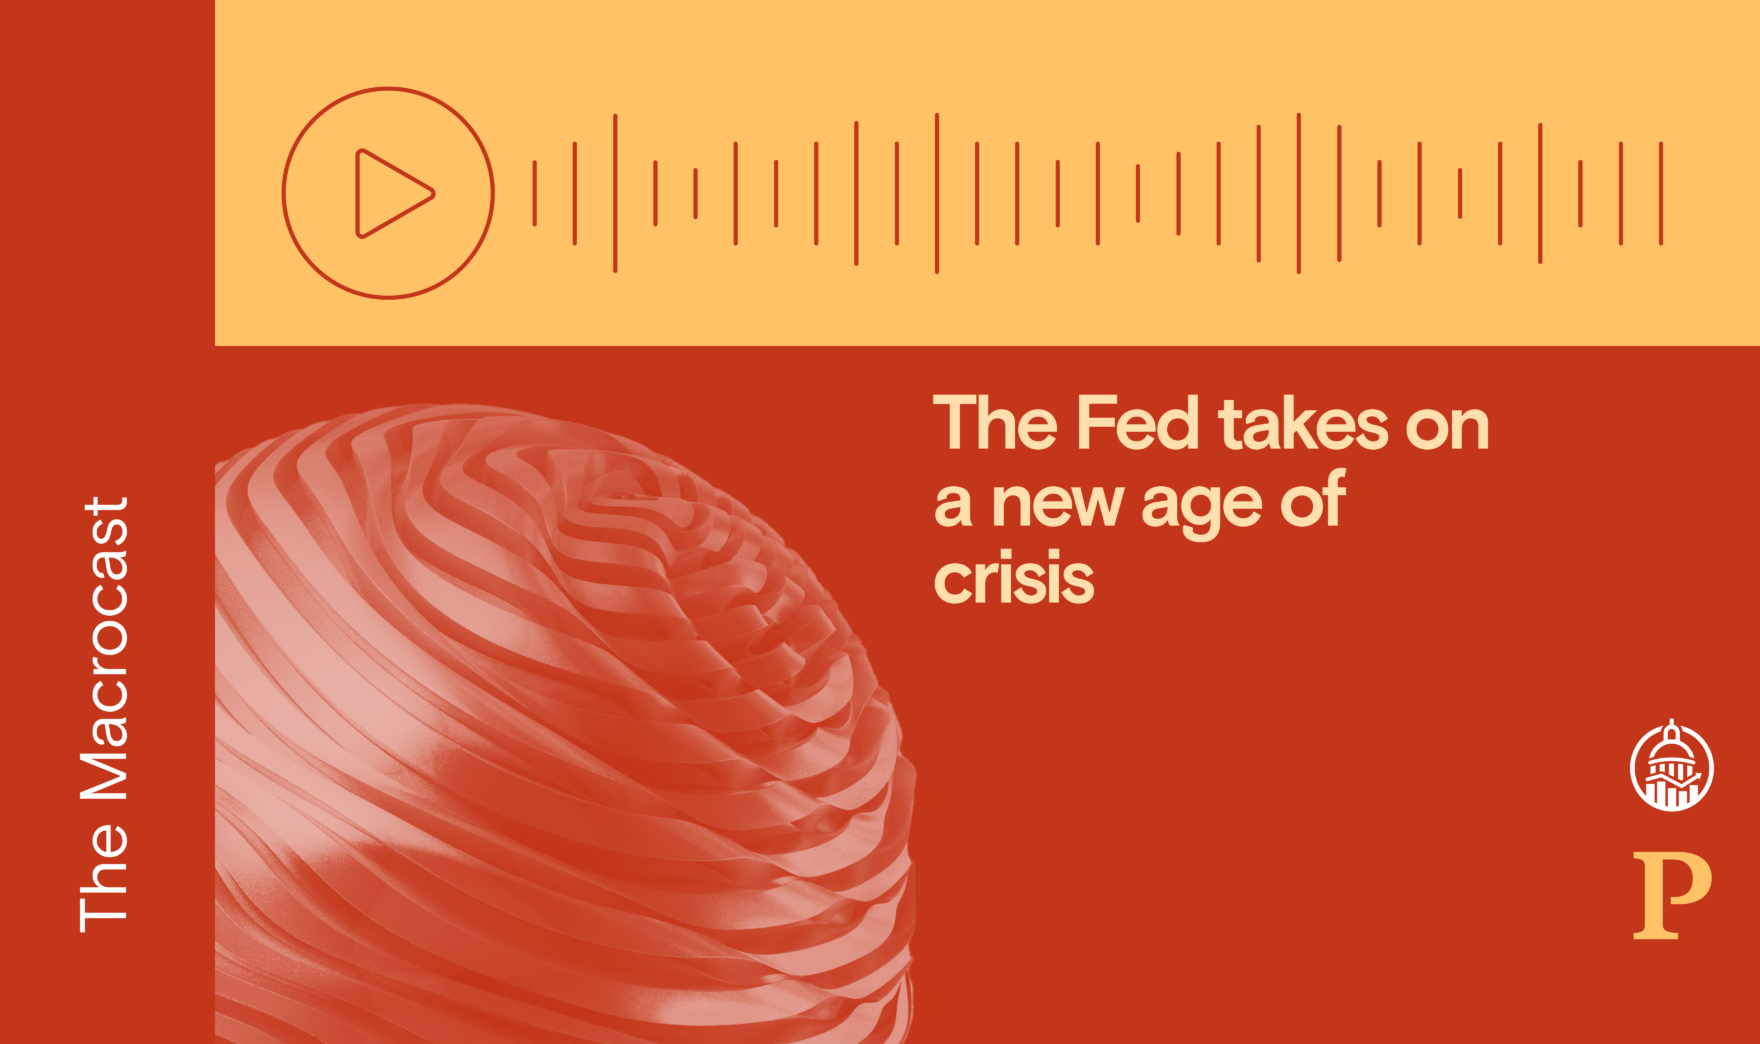 Macrocast: The Fed takes on a new age of crisis